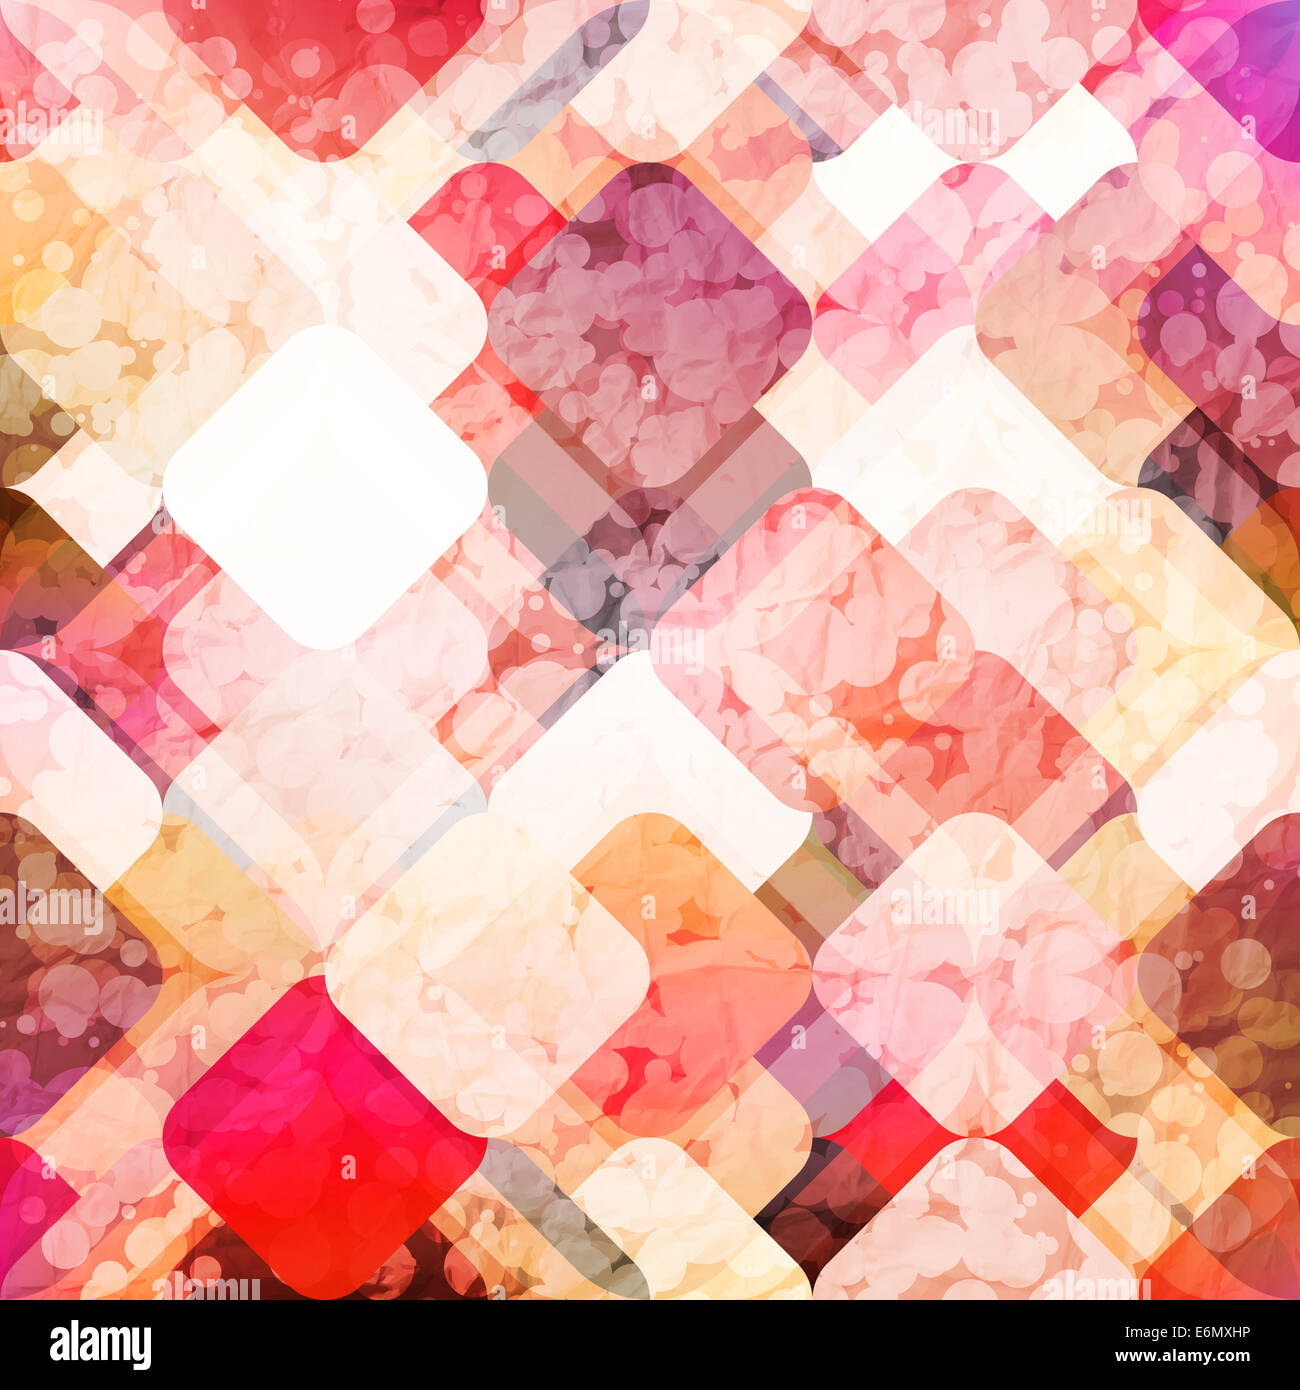 abstract background with colorful geometric shapes. paper texture Stock Photo